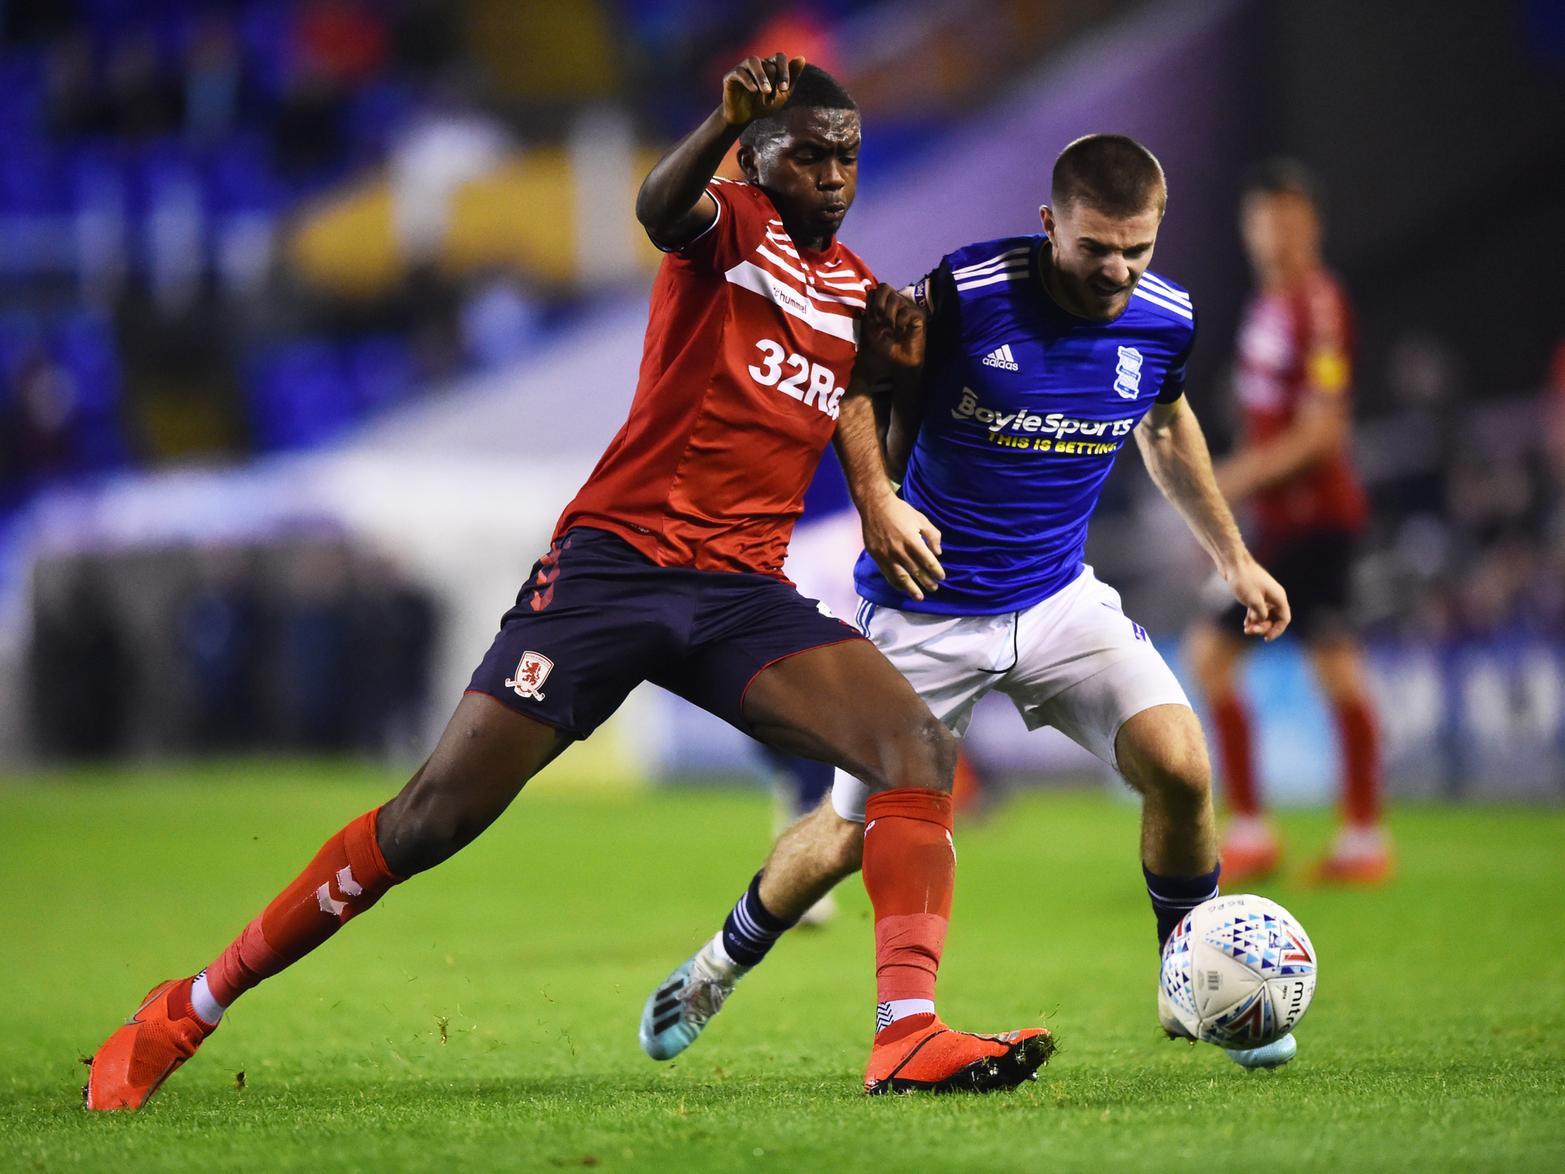 Middlesbrough's summer signing Anfernee Dijksteel looks to be closing in on returning from a long-term knee injury, and will feature in a game for the U23s later this week. (Club official website)